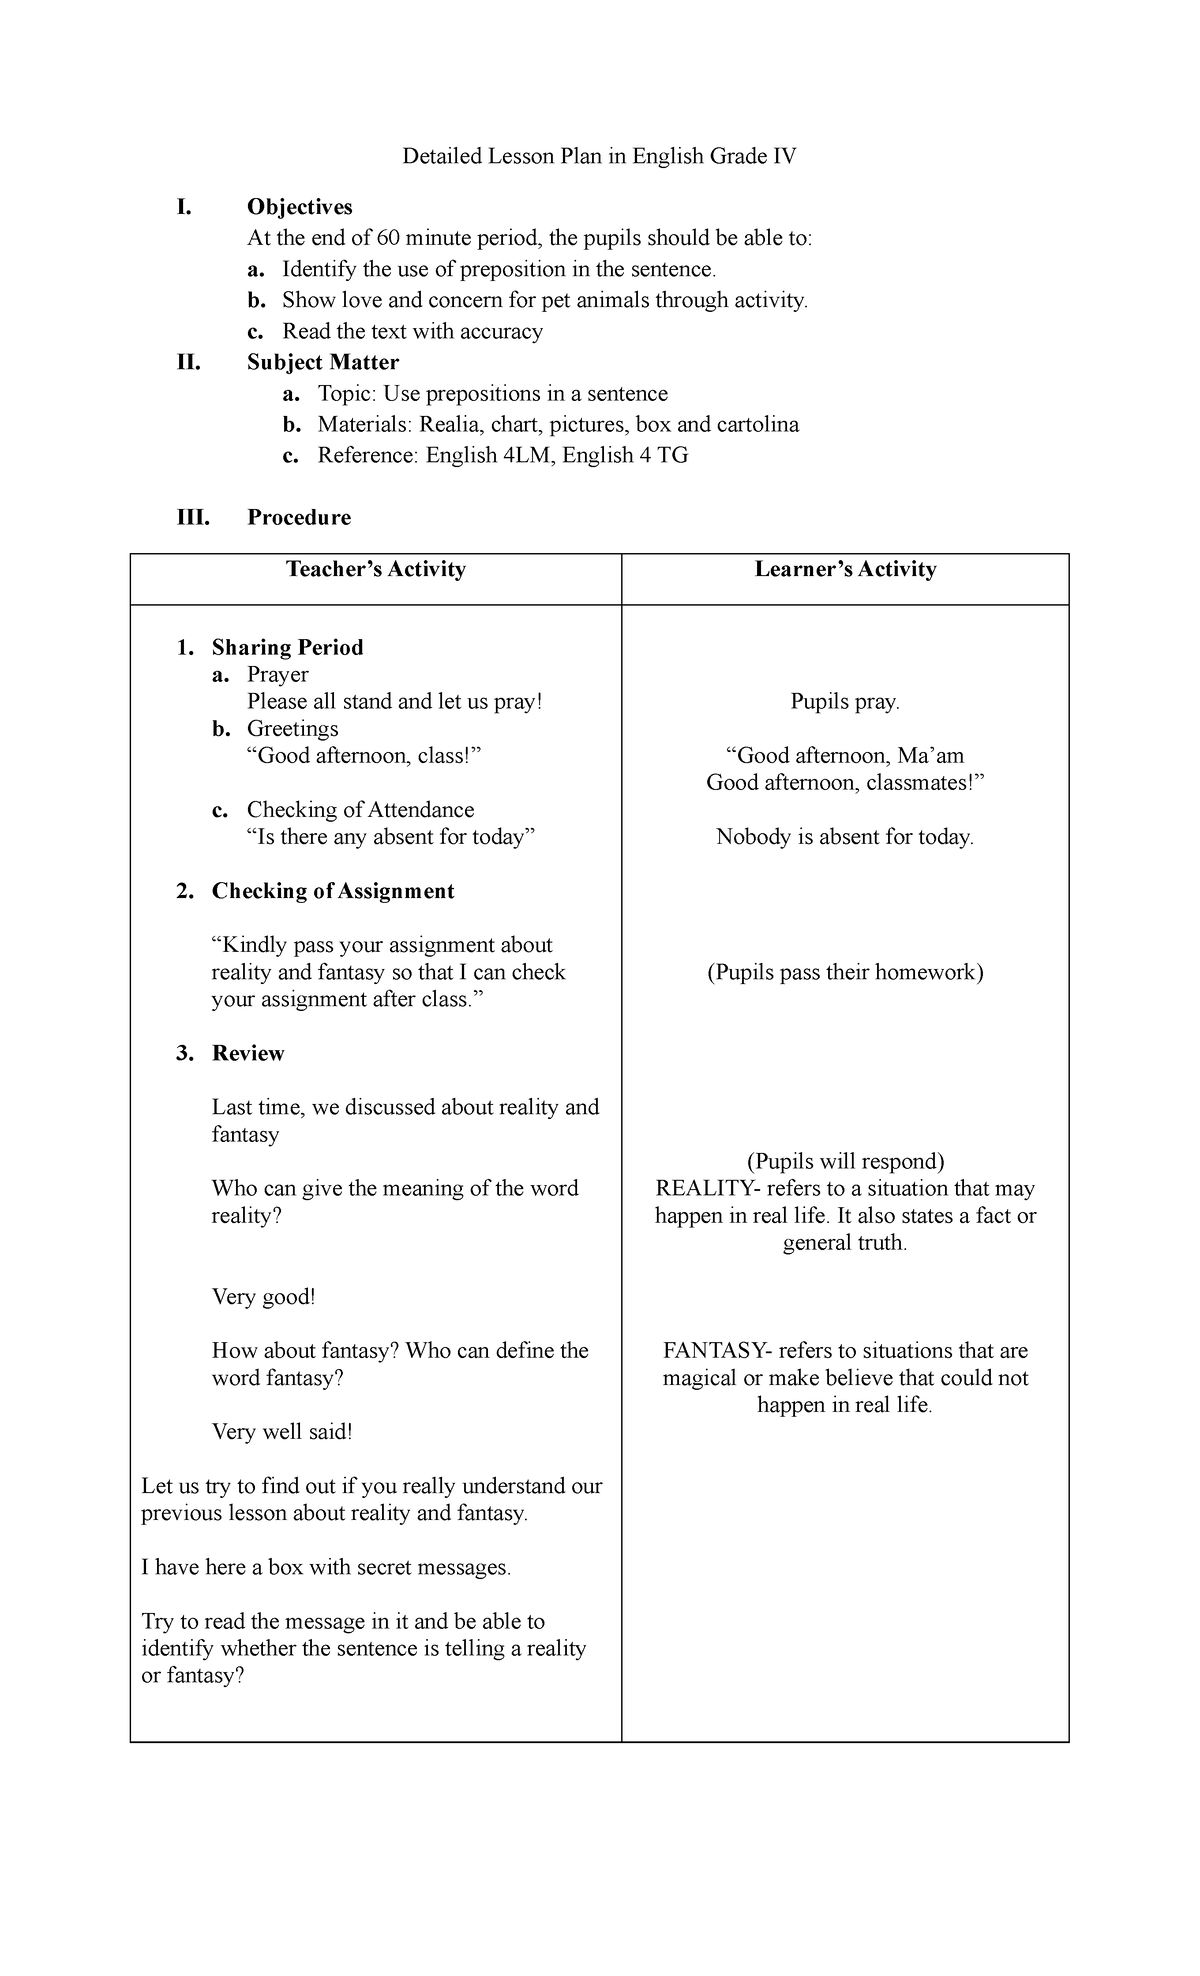 grade-4-lp-english-subject-teaching-guides-detailed-lesson-plan-in